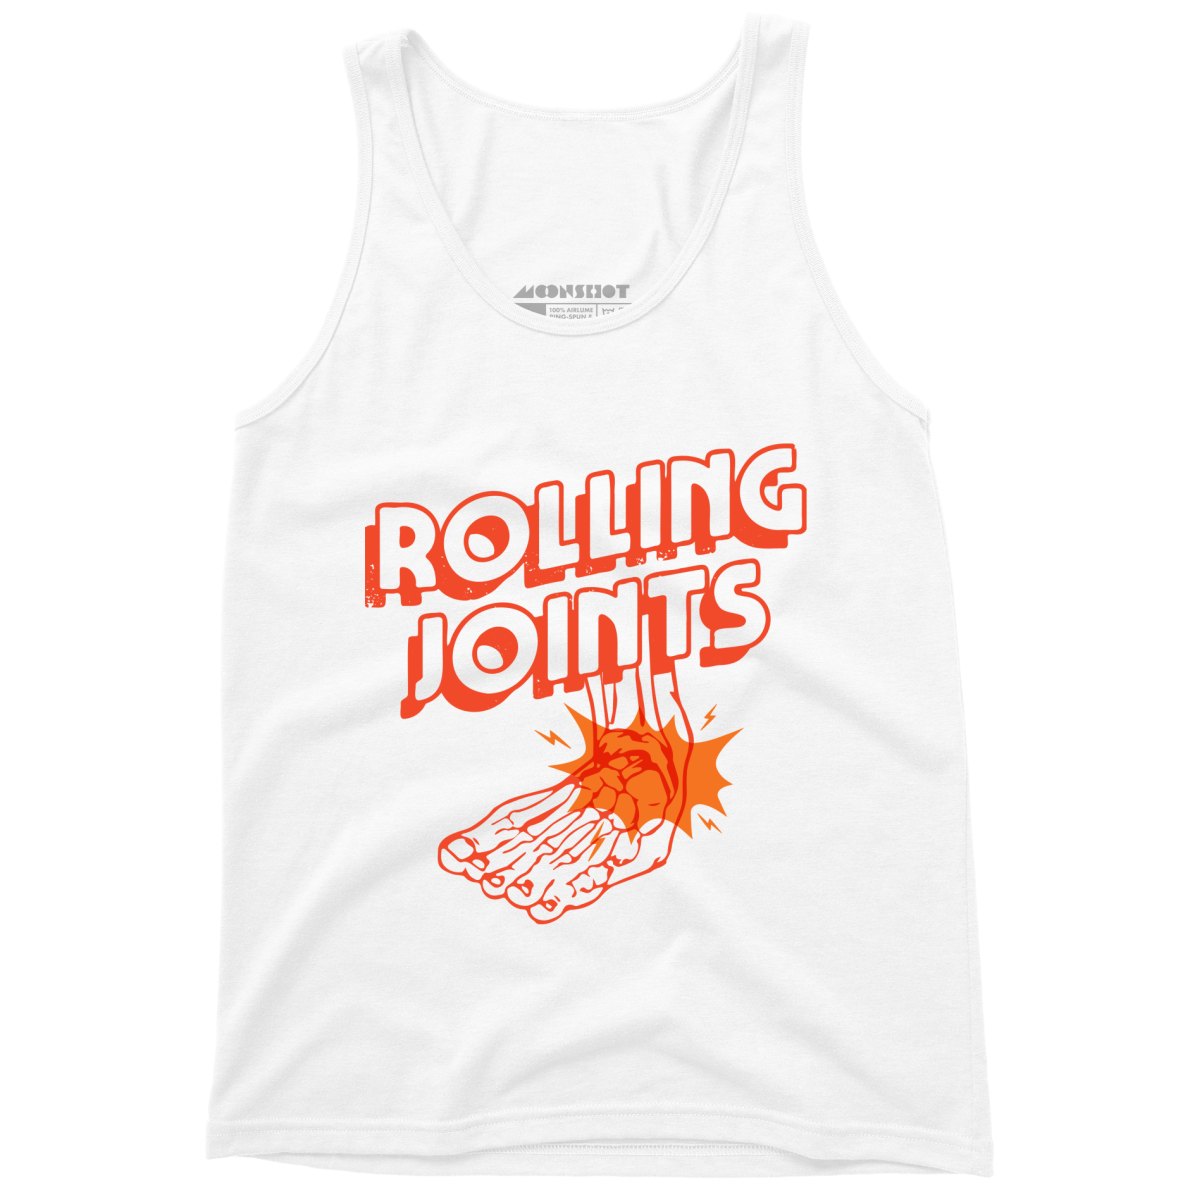 Rolling Joints - Unisex Tank Top